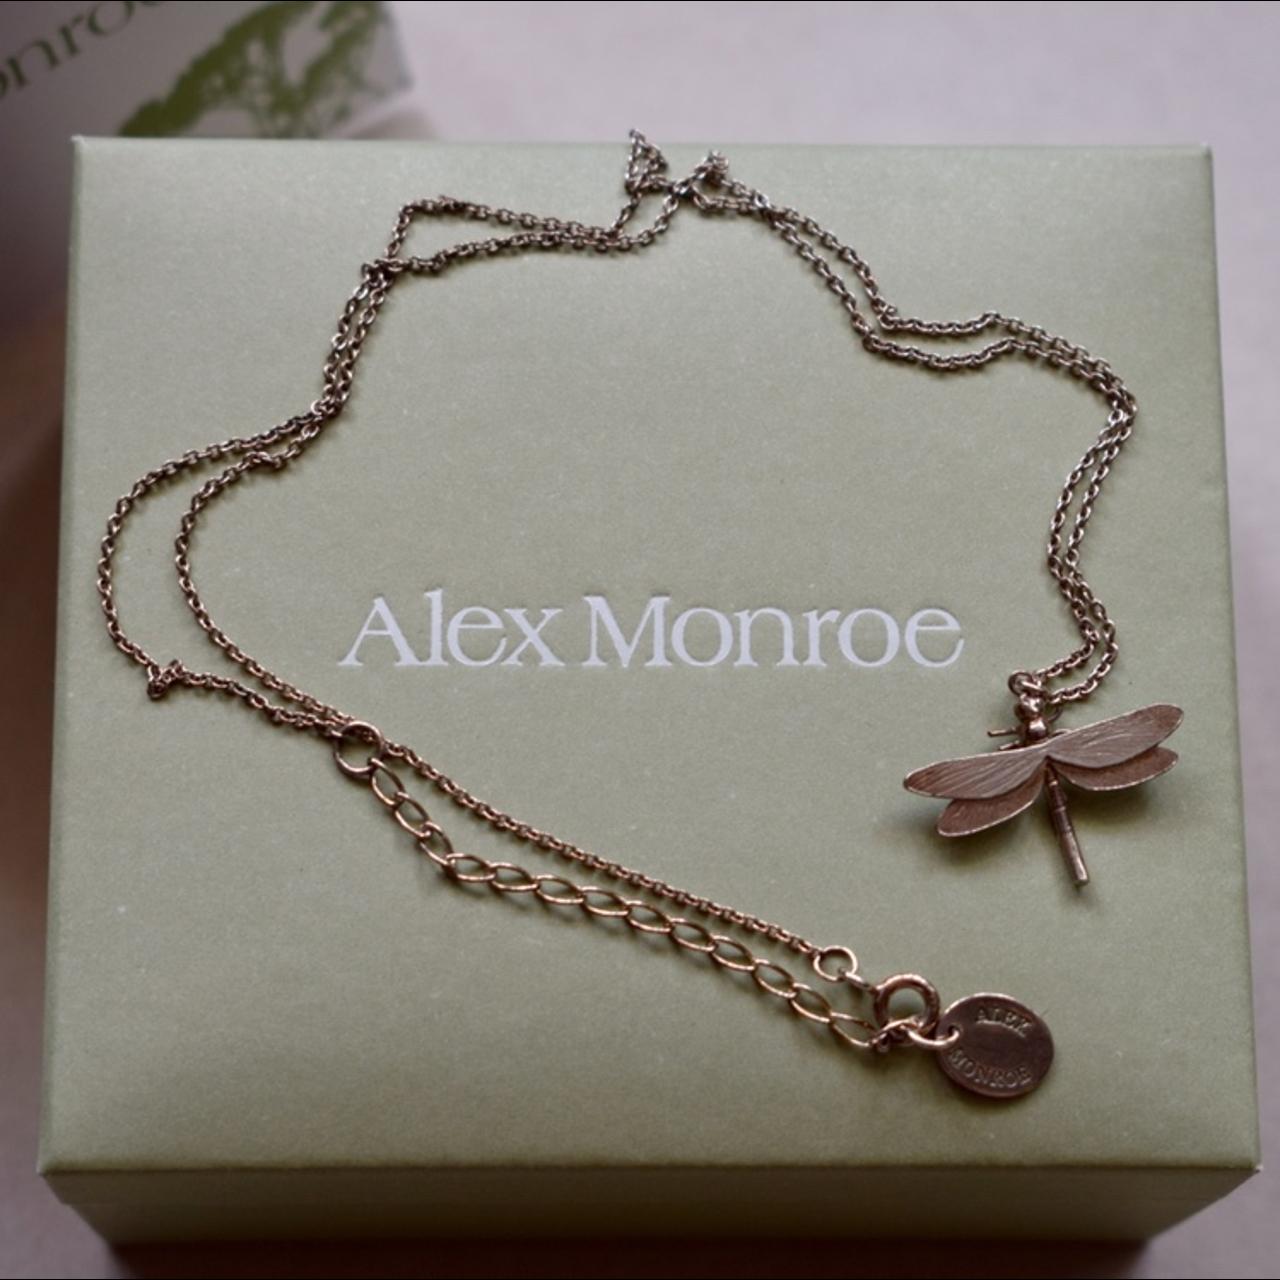 Alex Monroe Dragonfly Fossil Nugget Necklace Gold Plate - PLAISIRS -  Wellbeing and Lifestyle Products & Gifts